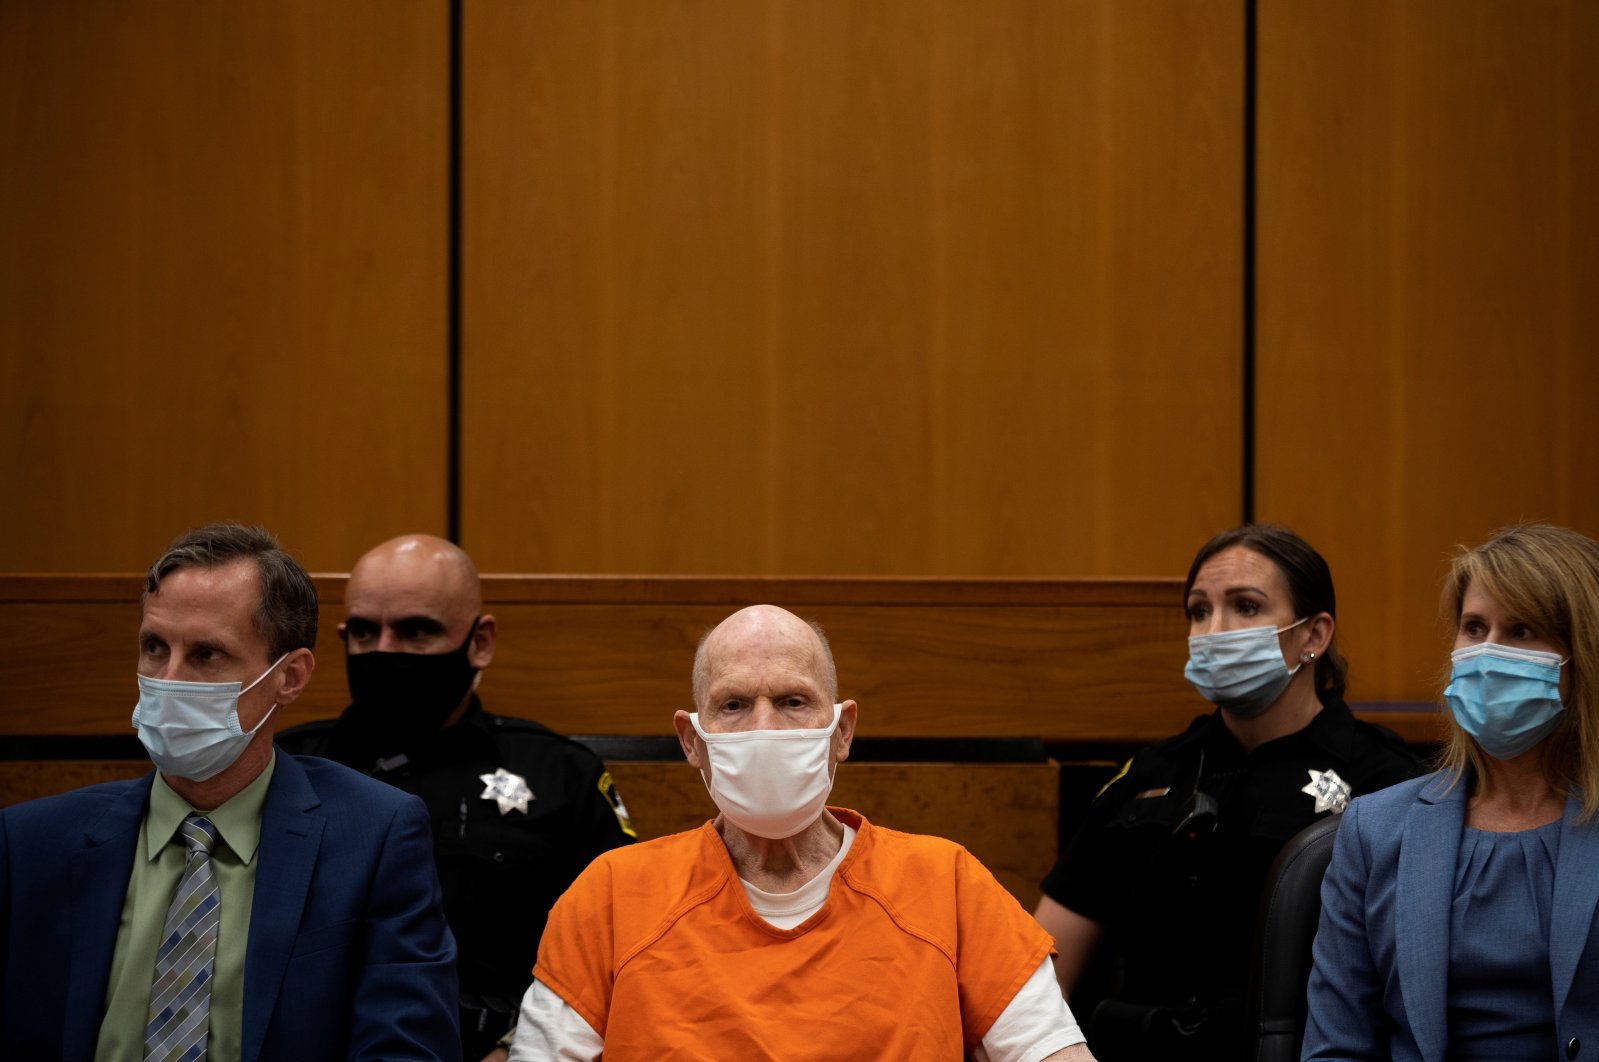 Joseph James DeAngelo, known as the Golden State Killer, looks away from the podium as people who DeAngelo victimized make their statements on the first day of victim impact statements at the Gordon D. Schaber Sacramento County Courthouse in Sacramento, California, U.S., Aug. 18, 2020. (Reuters Photo)